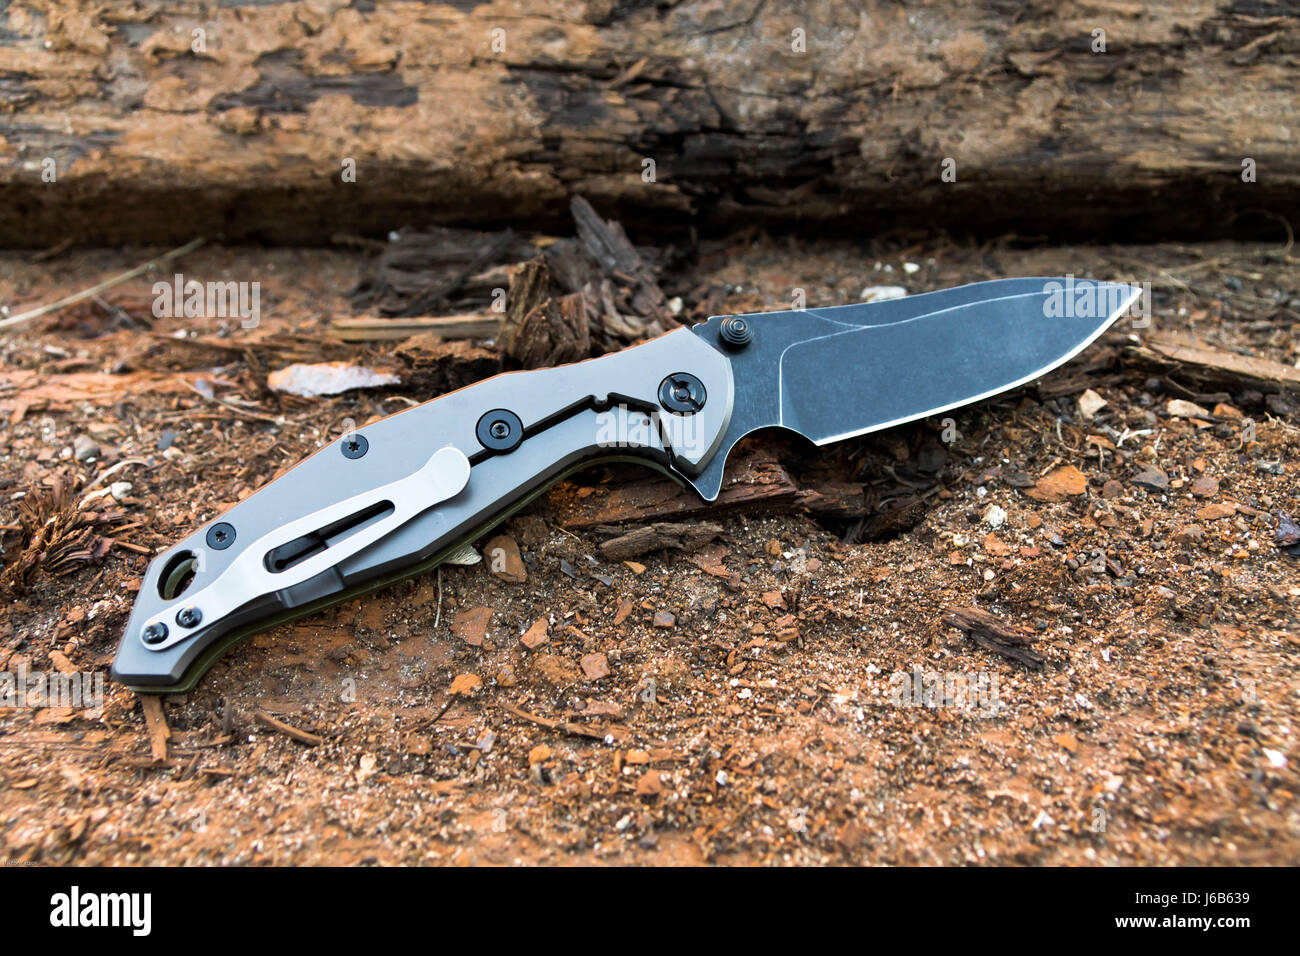 Knife with blake blade and gray handle. Stock Photo